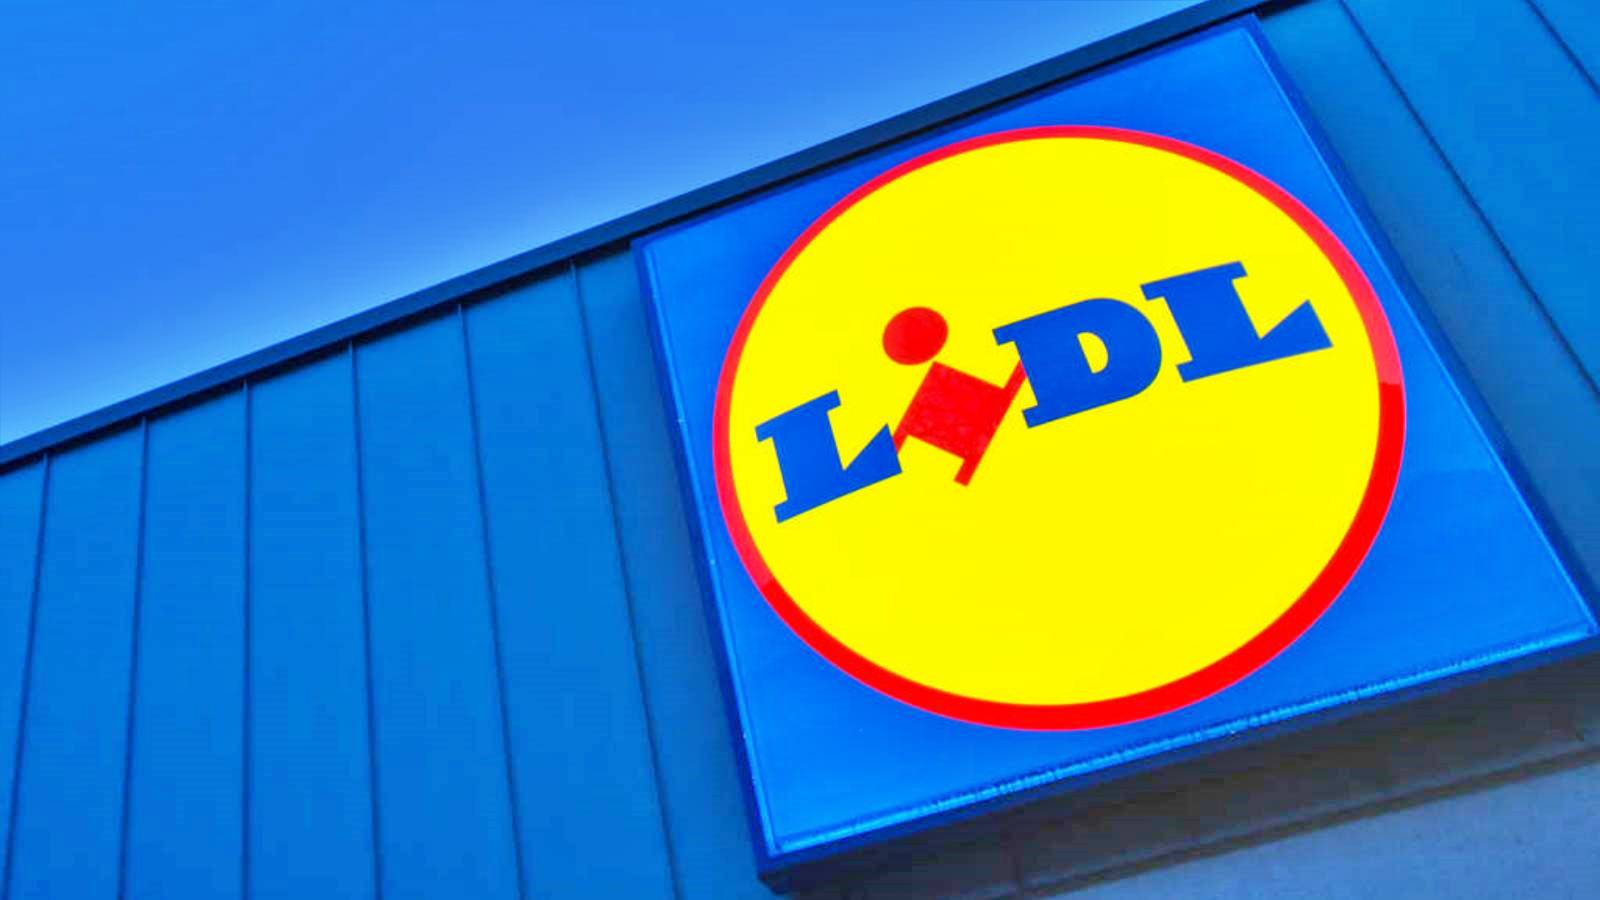 LIDL Romania Changes All Stores December 1